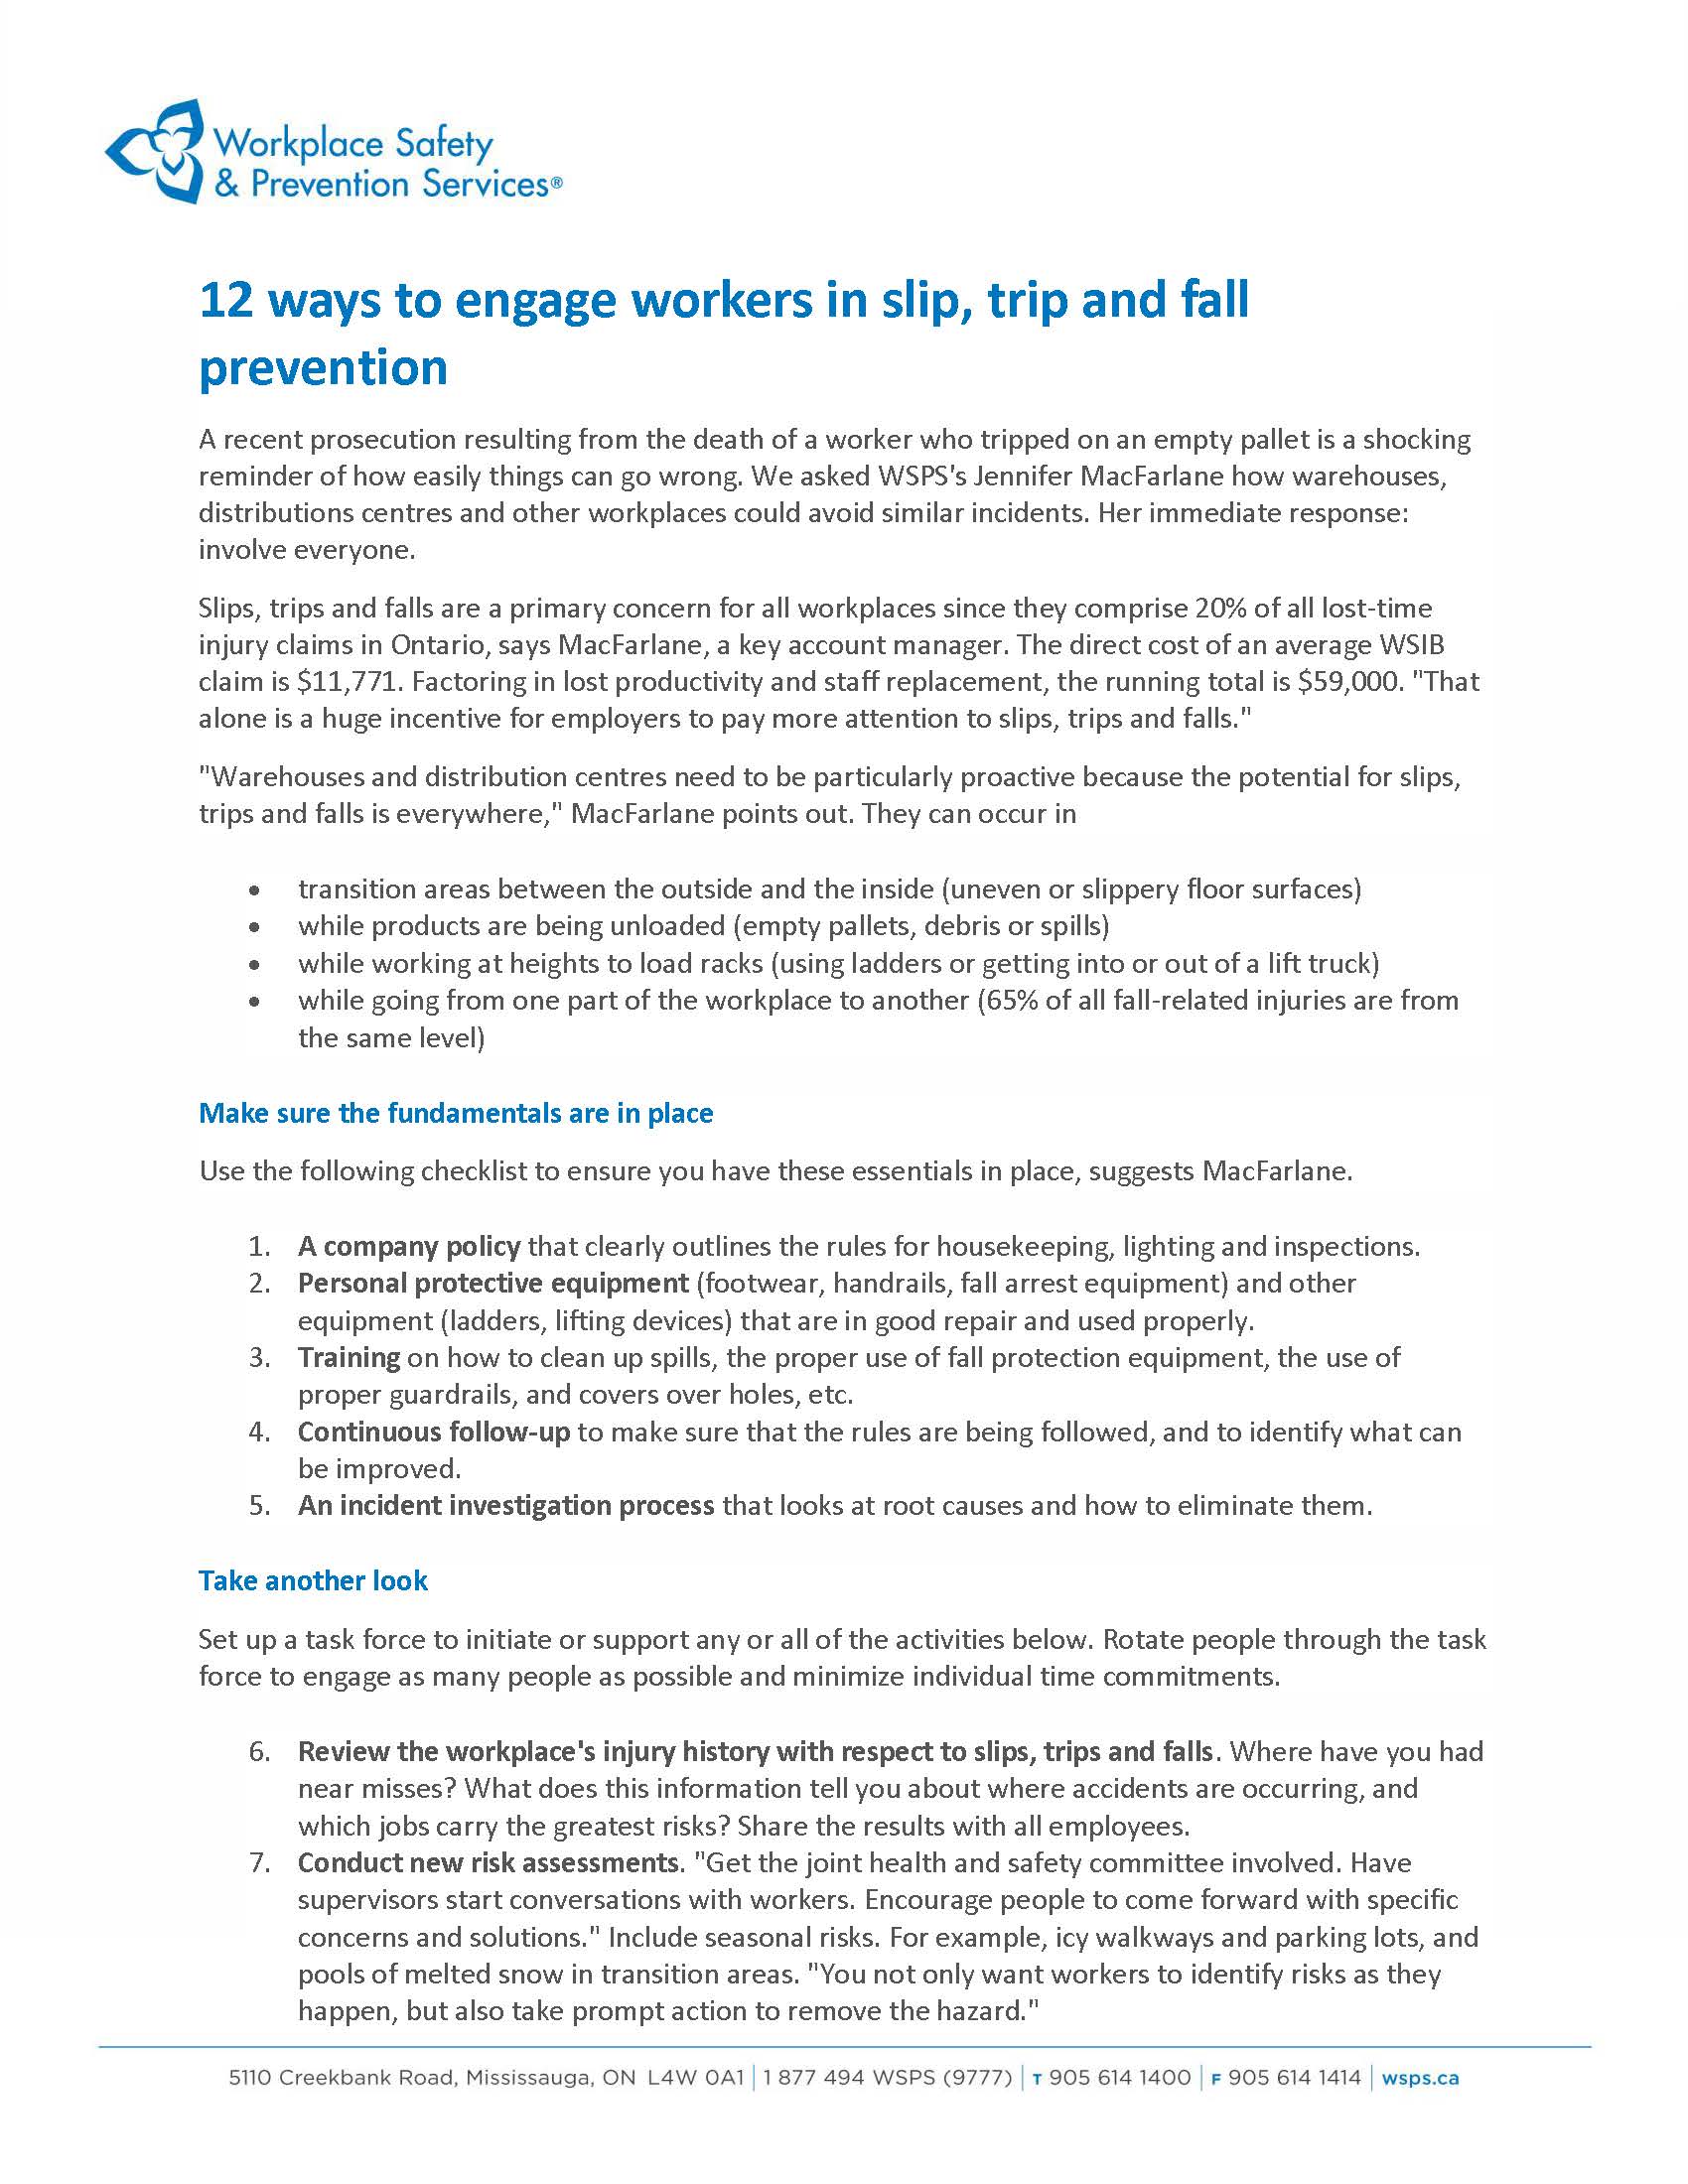 12 WAYS TO ENGAGE WORKERS ON SLIPS, TRIPS & FALLS